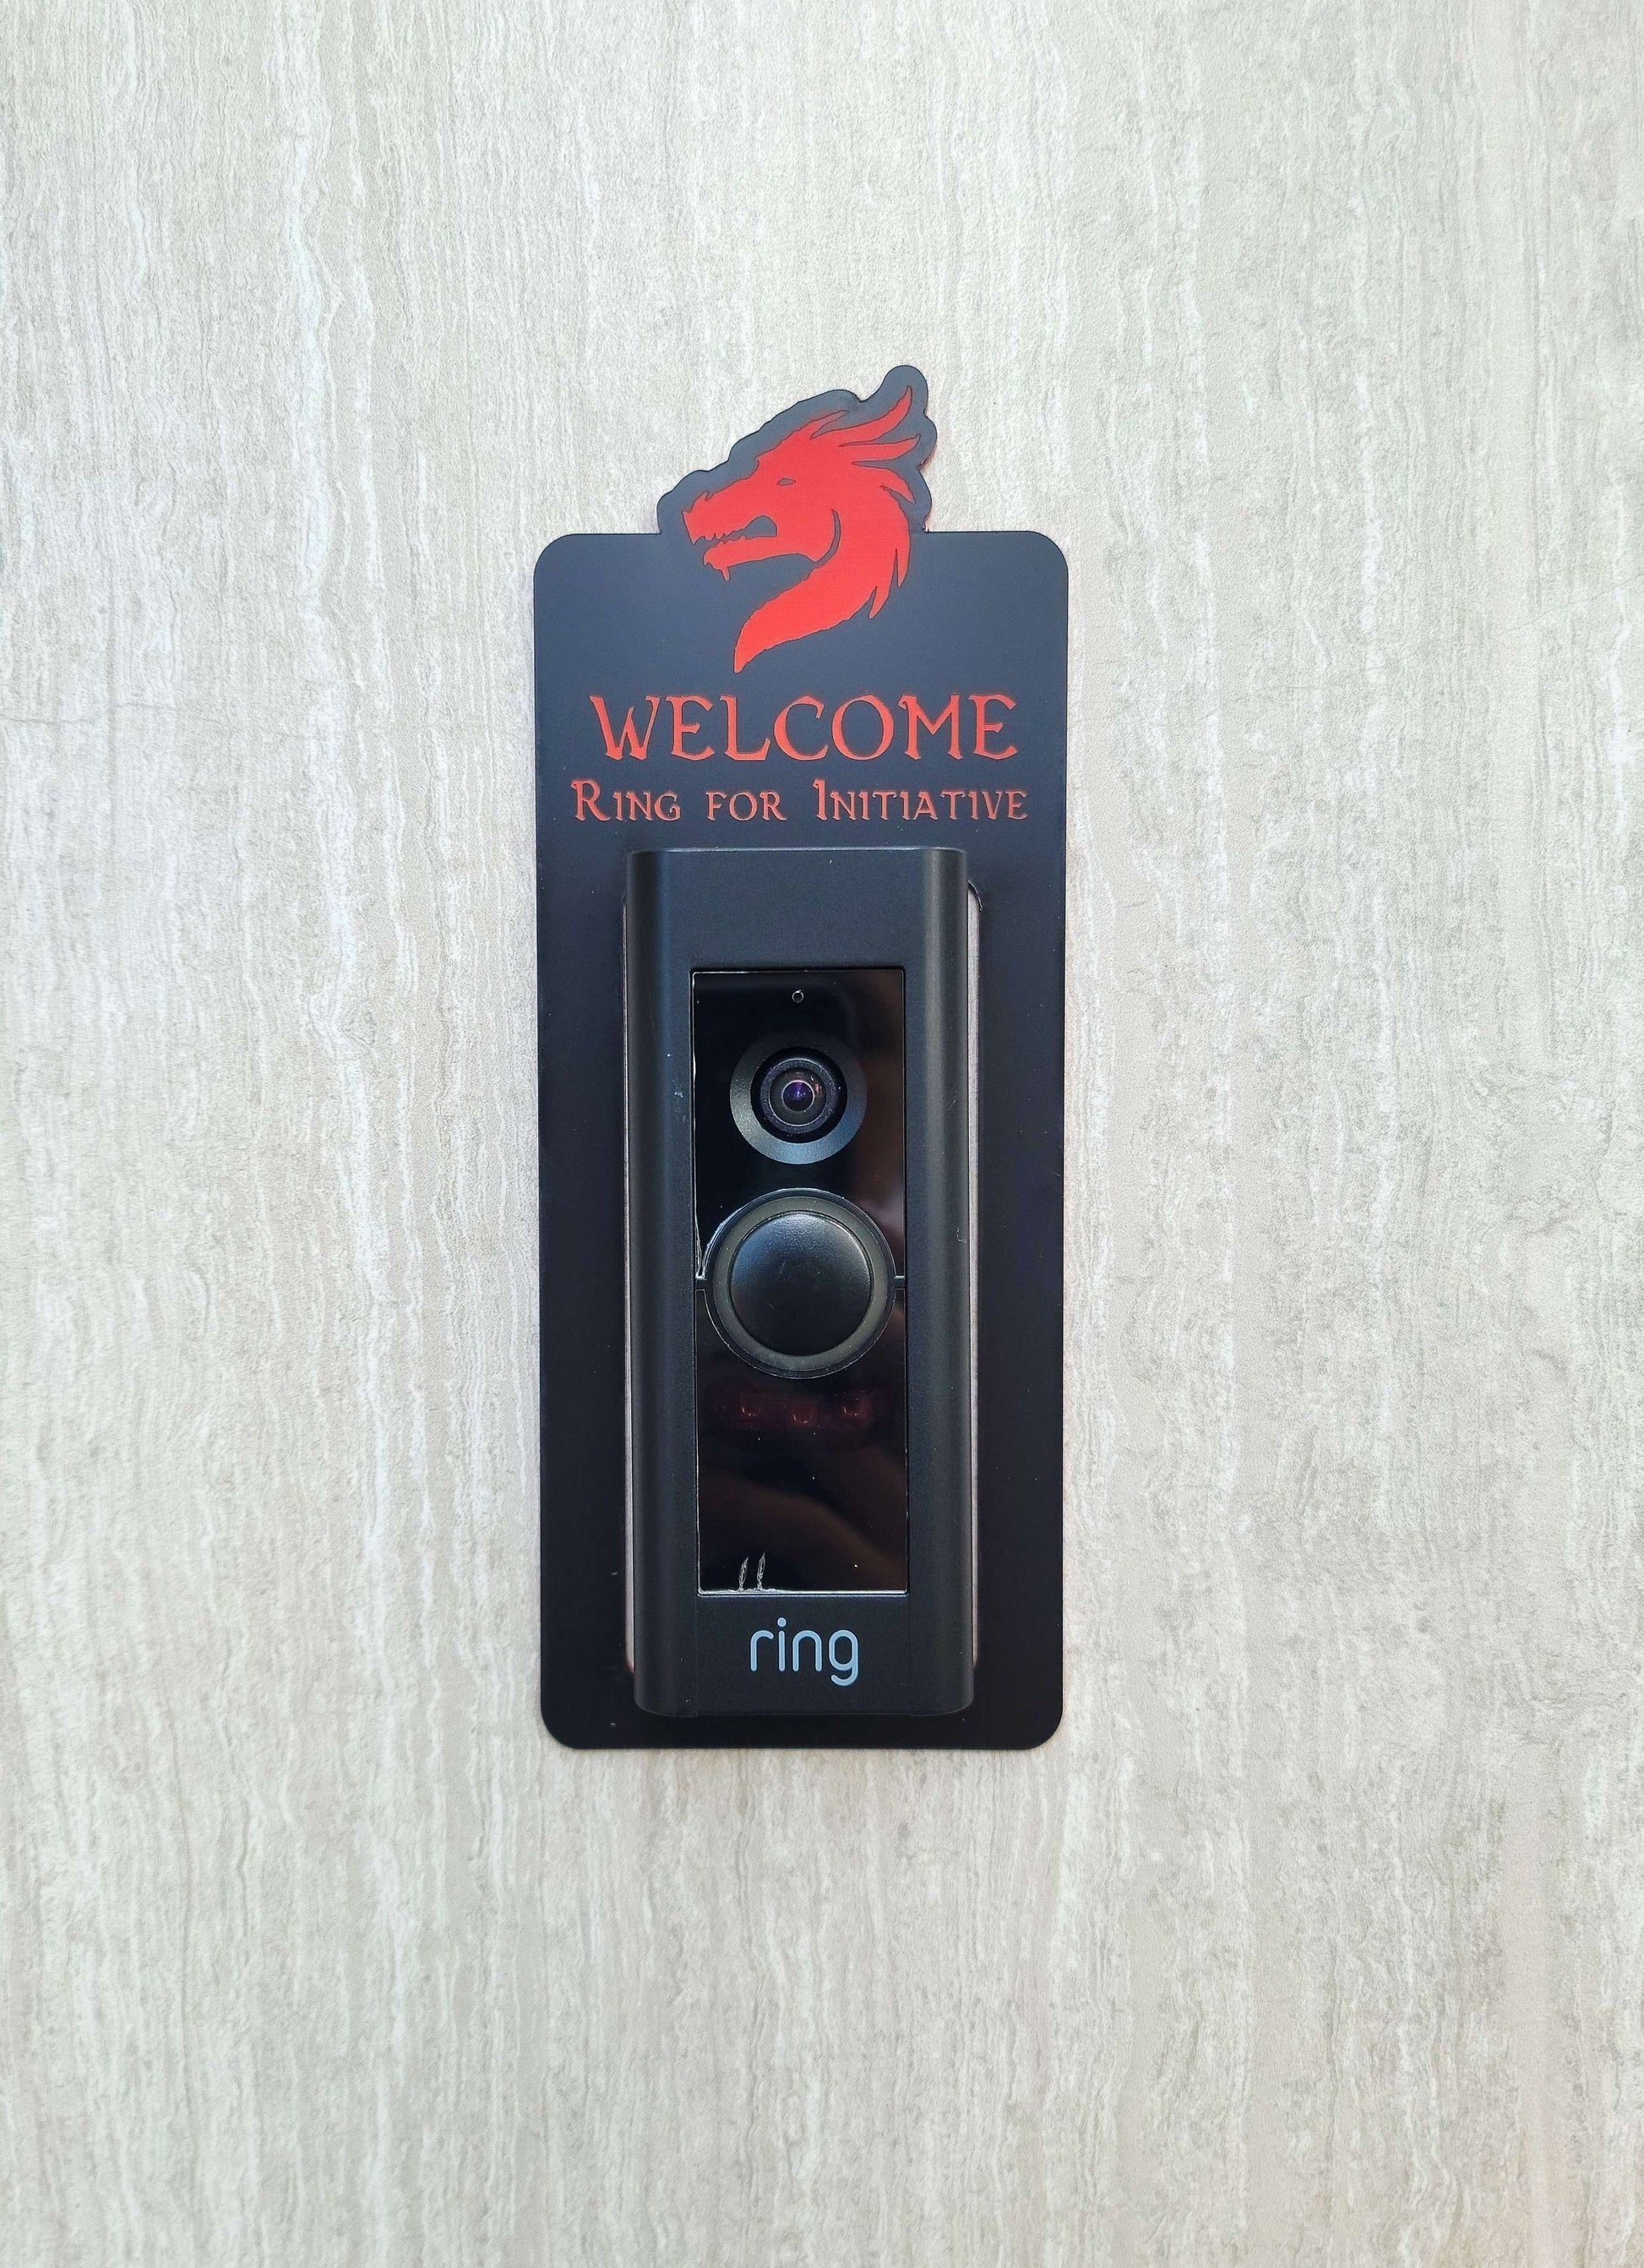 Black doorbell surround with red dragon head and lettering stating Welcome Ring for Initiative around Ring doorbell on gray background